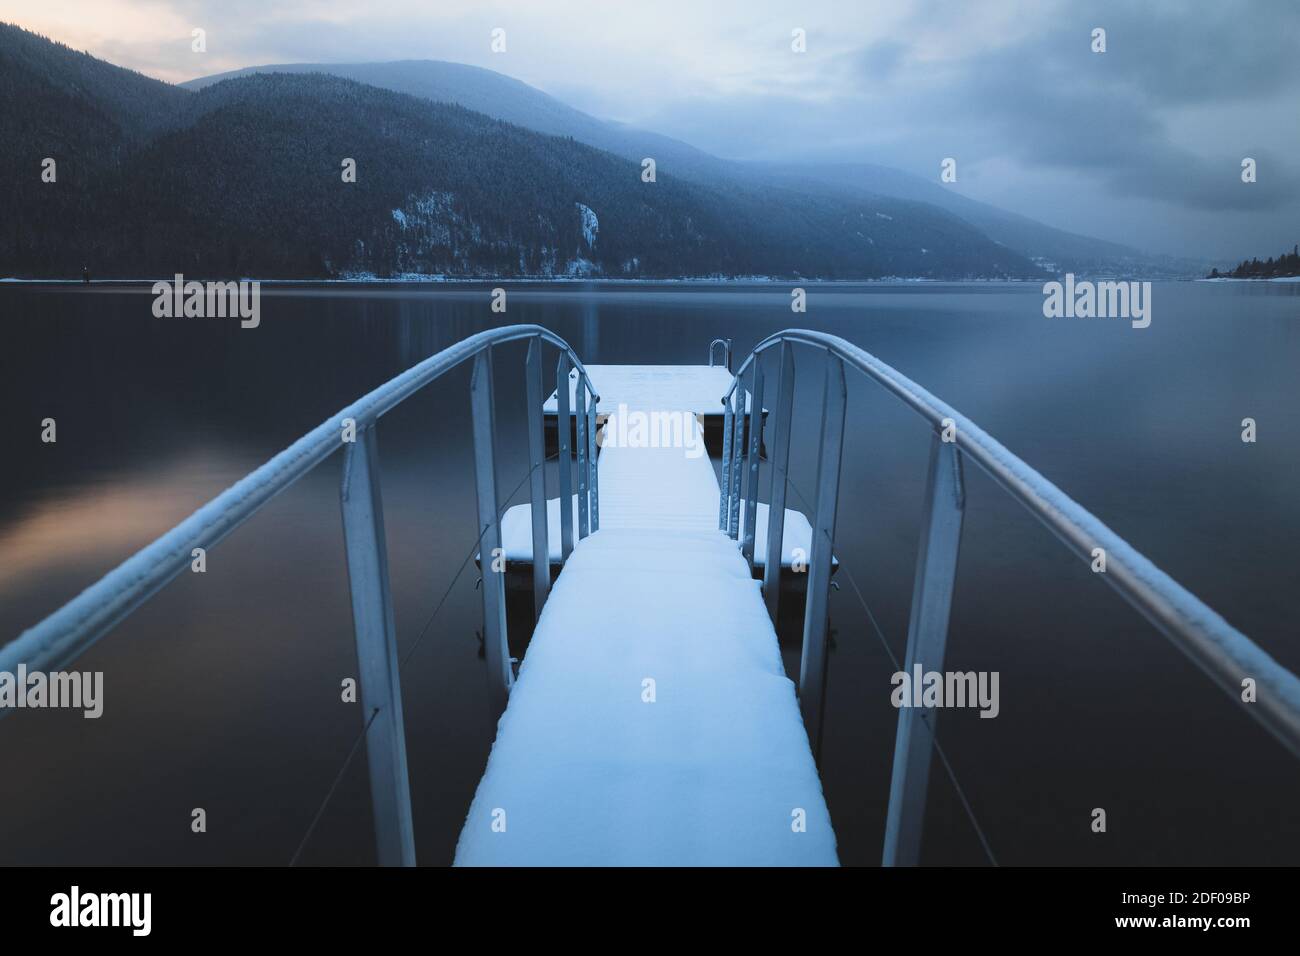 A snow covered jetty and dock on Kootenay Lake Stock Photo